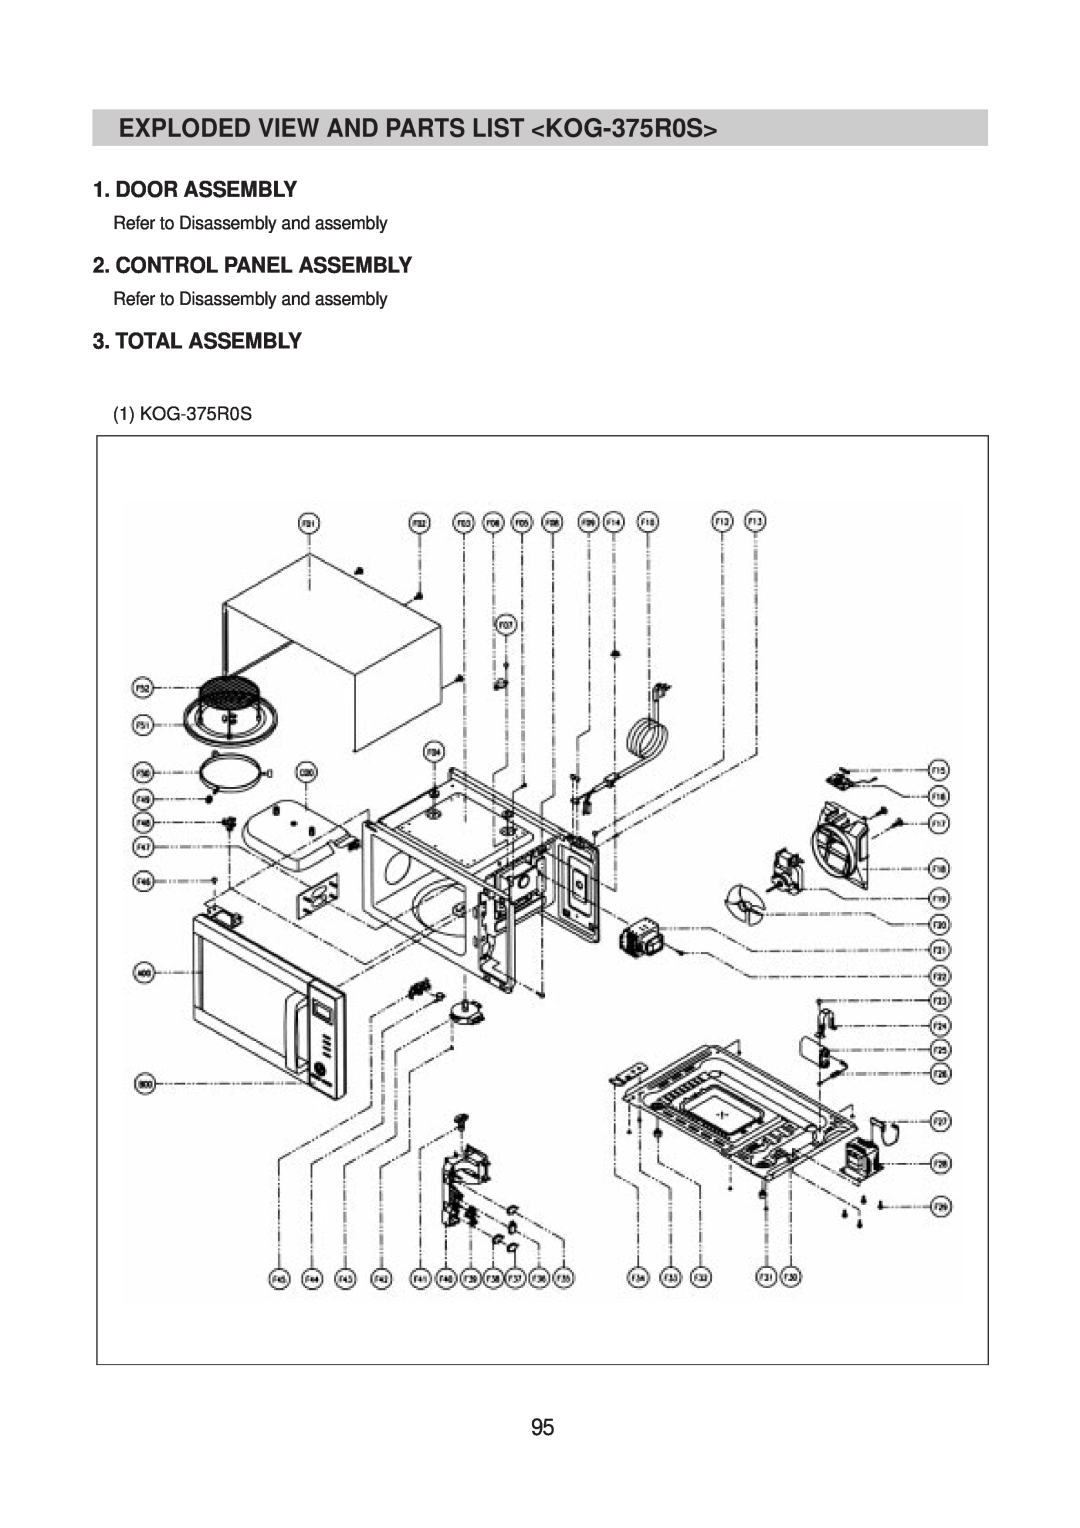 Daewoo KOG-391G0S EXPLODED VIEW AND PARTS LIST KOG-375R0S, Door Assembly, Control Panel Assembly, Total Assembly 